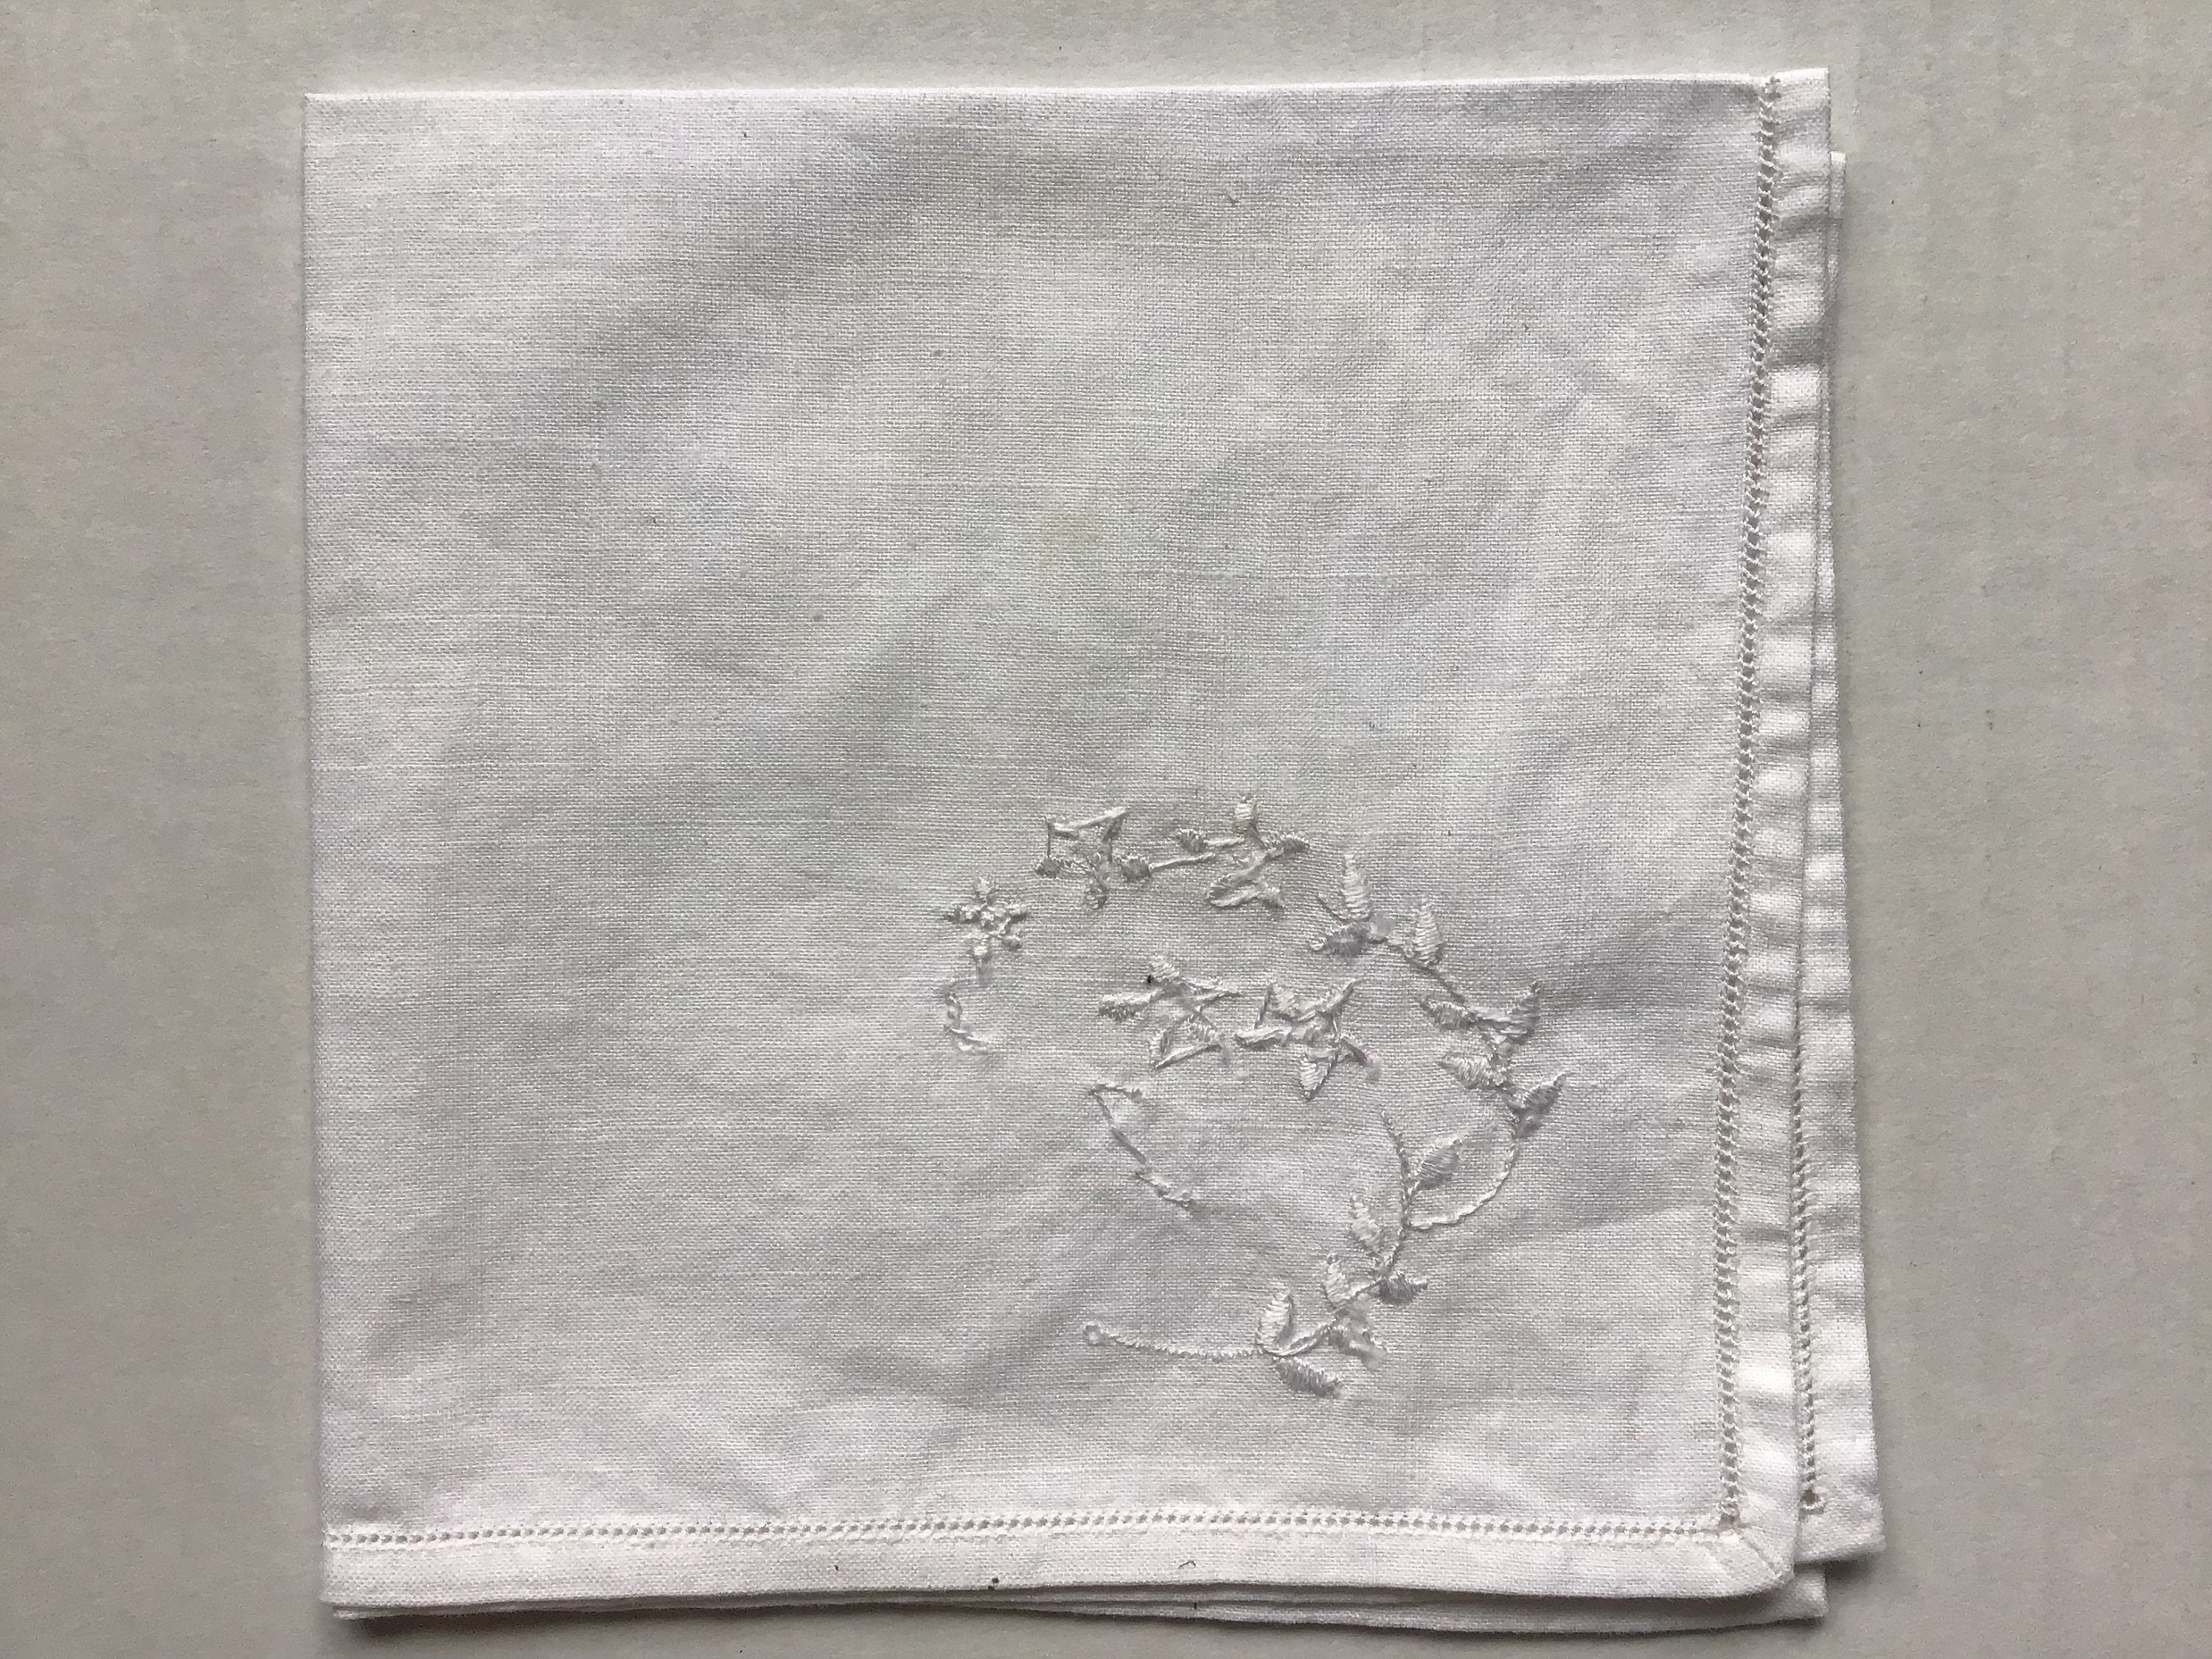 Vintage Hanky White on White Embroidery 10 1/2 Square Cotton Handkerchief with Embroidered Corner Pulled Thread Edge